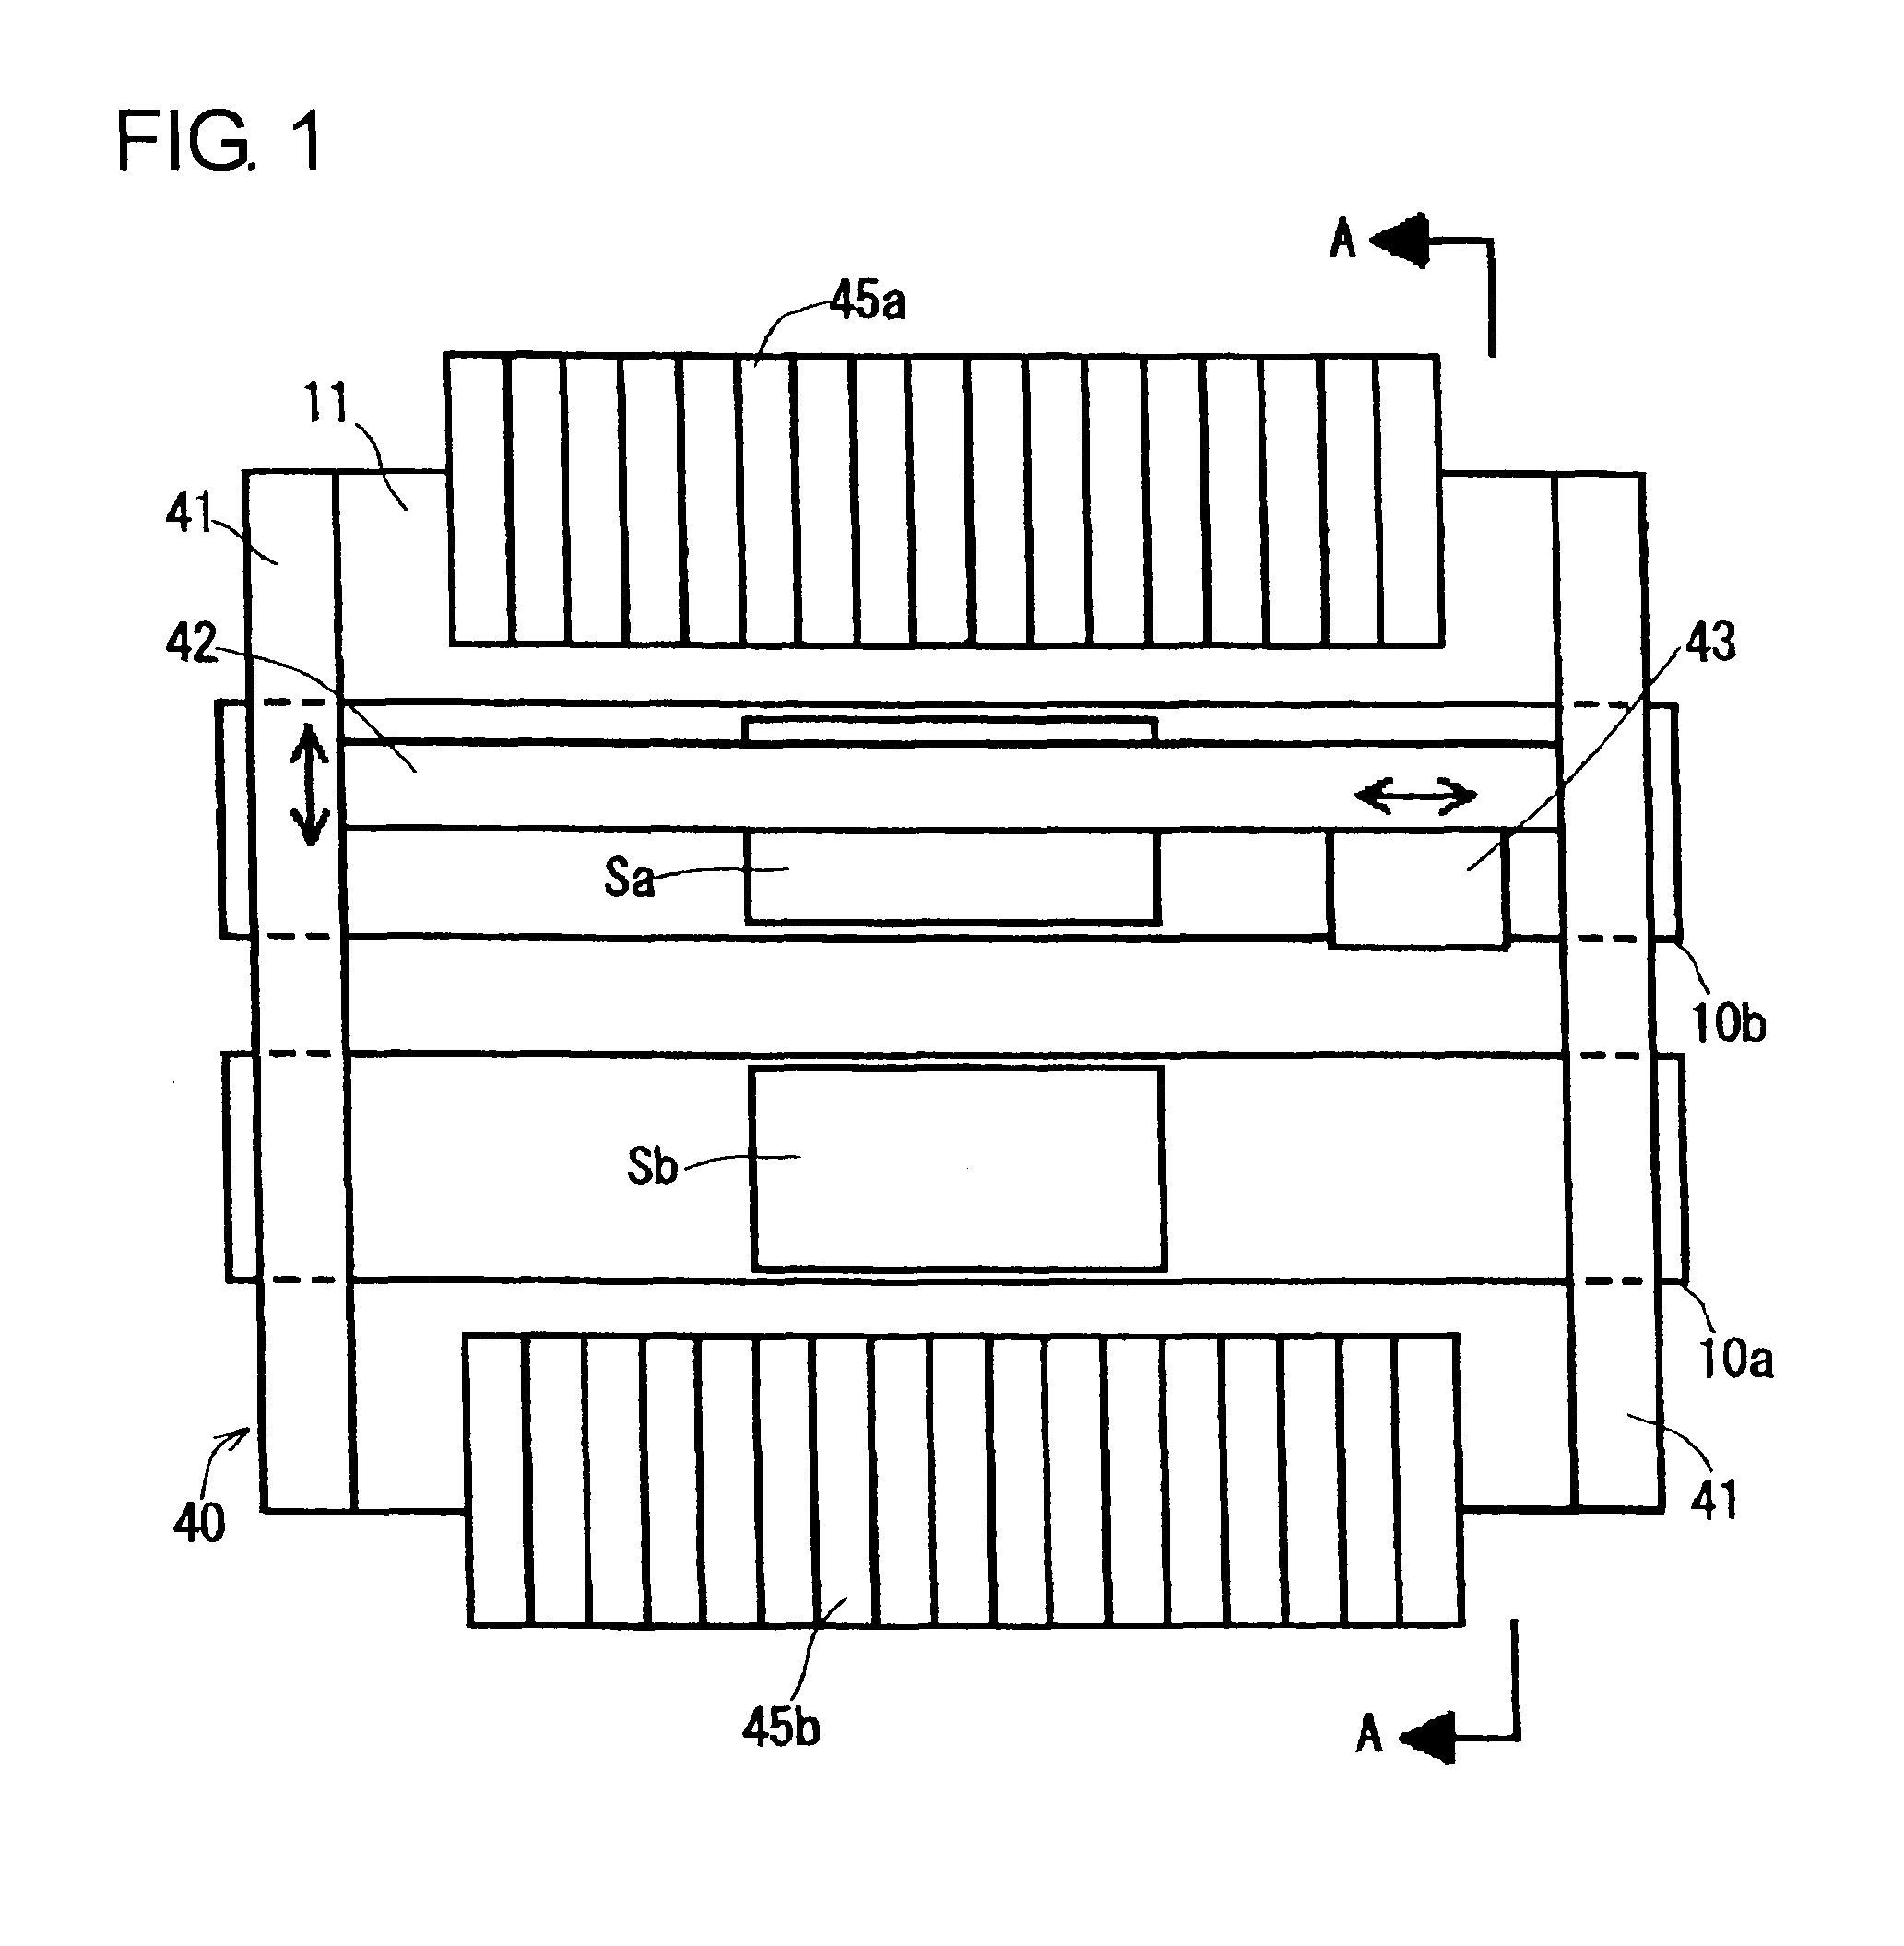 Component mounting apparatus